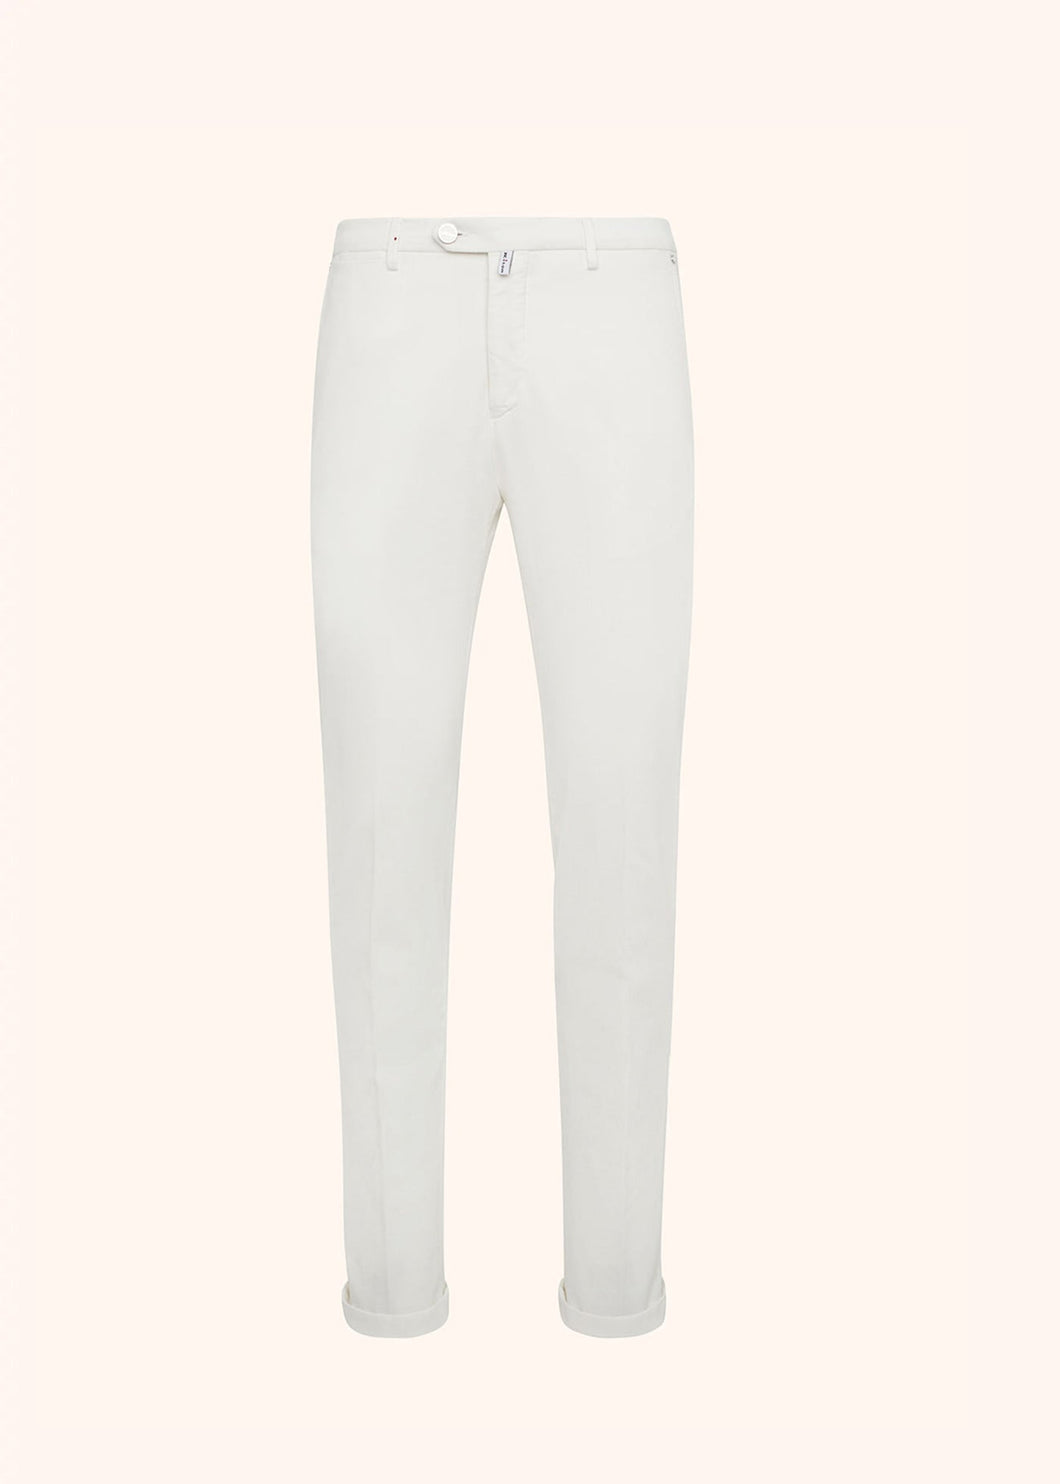 Kiton ivory trousers for man, made of cotton